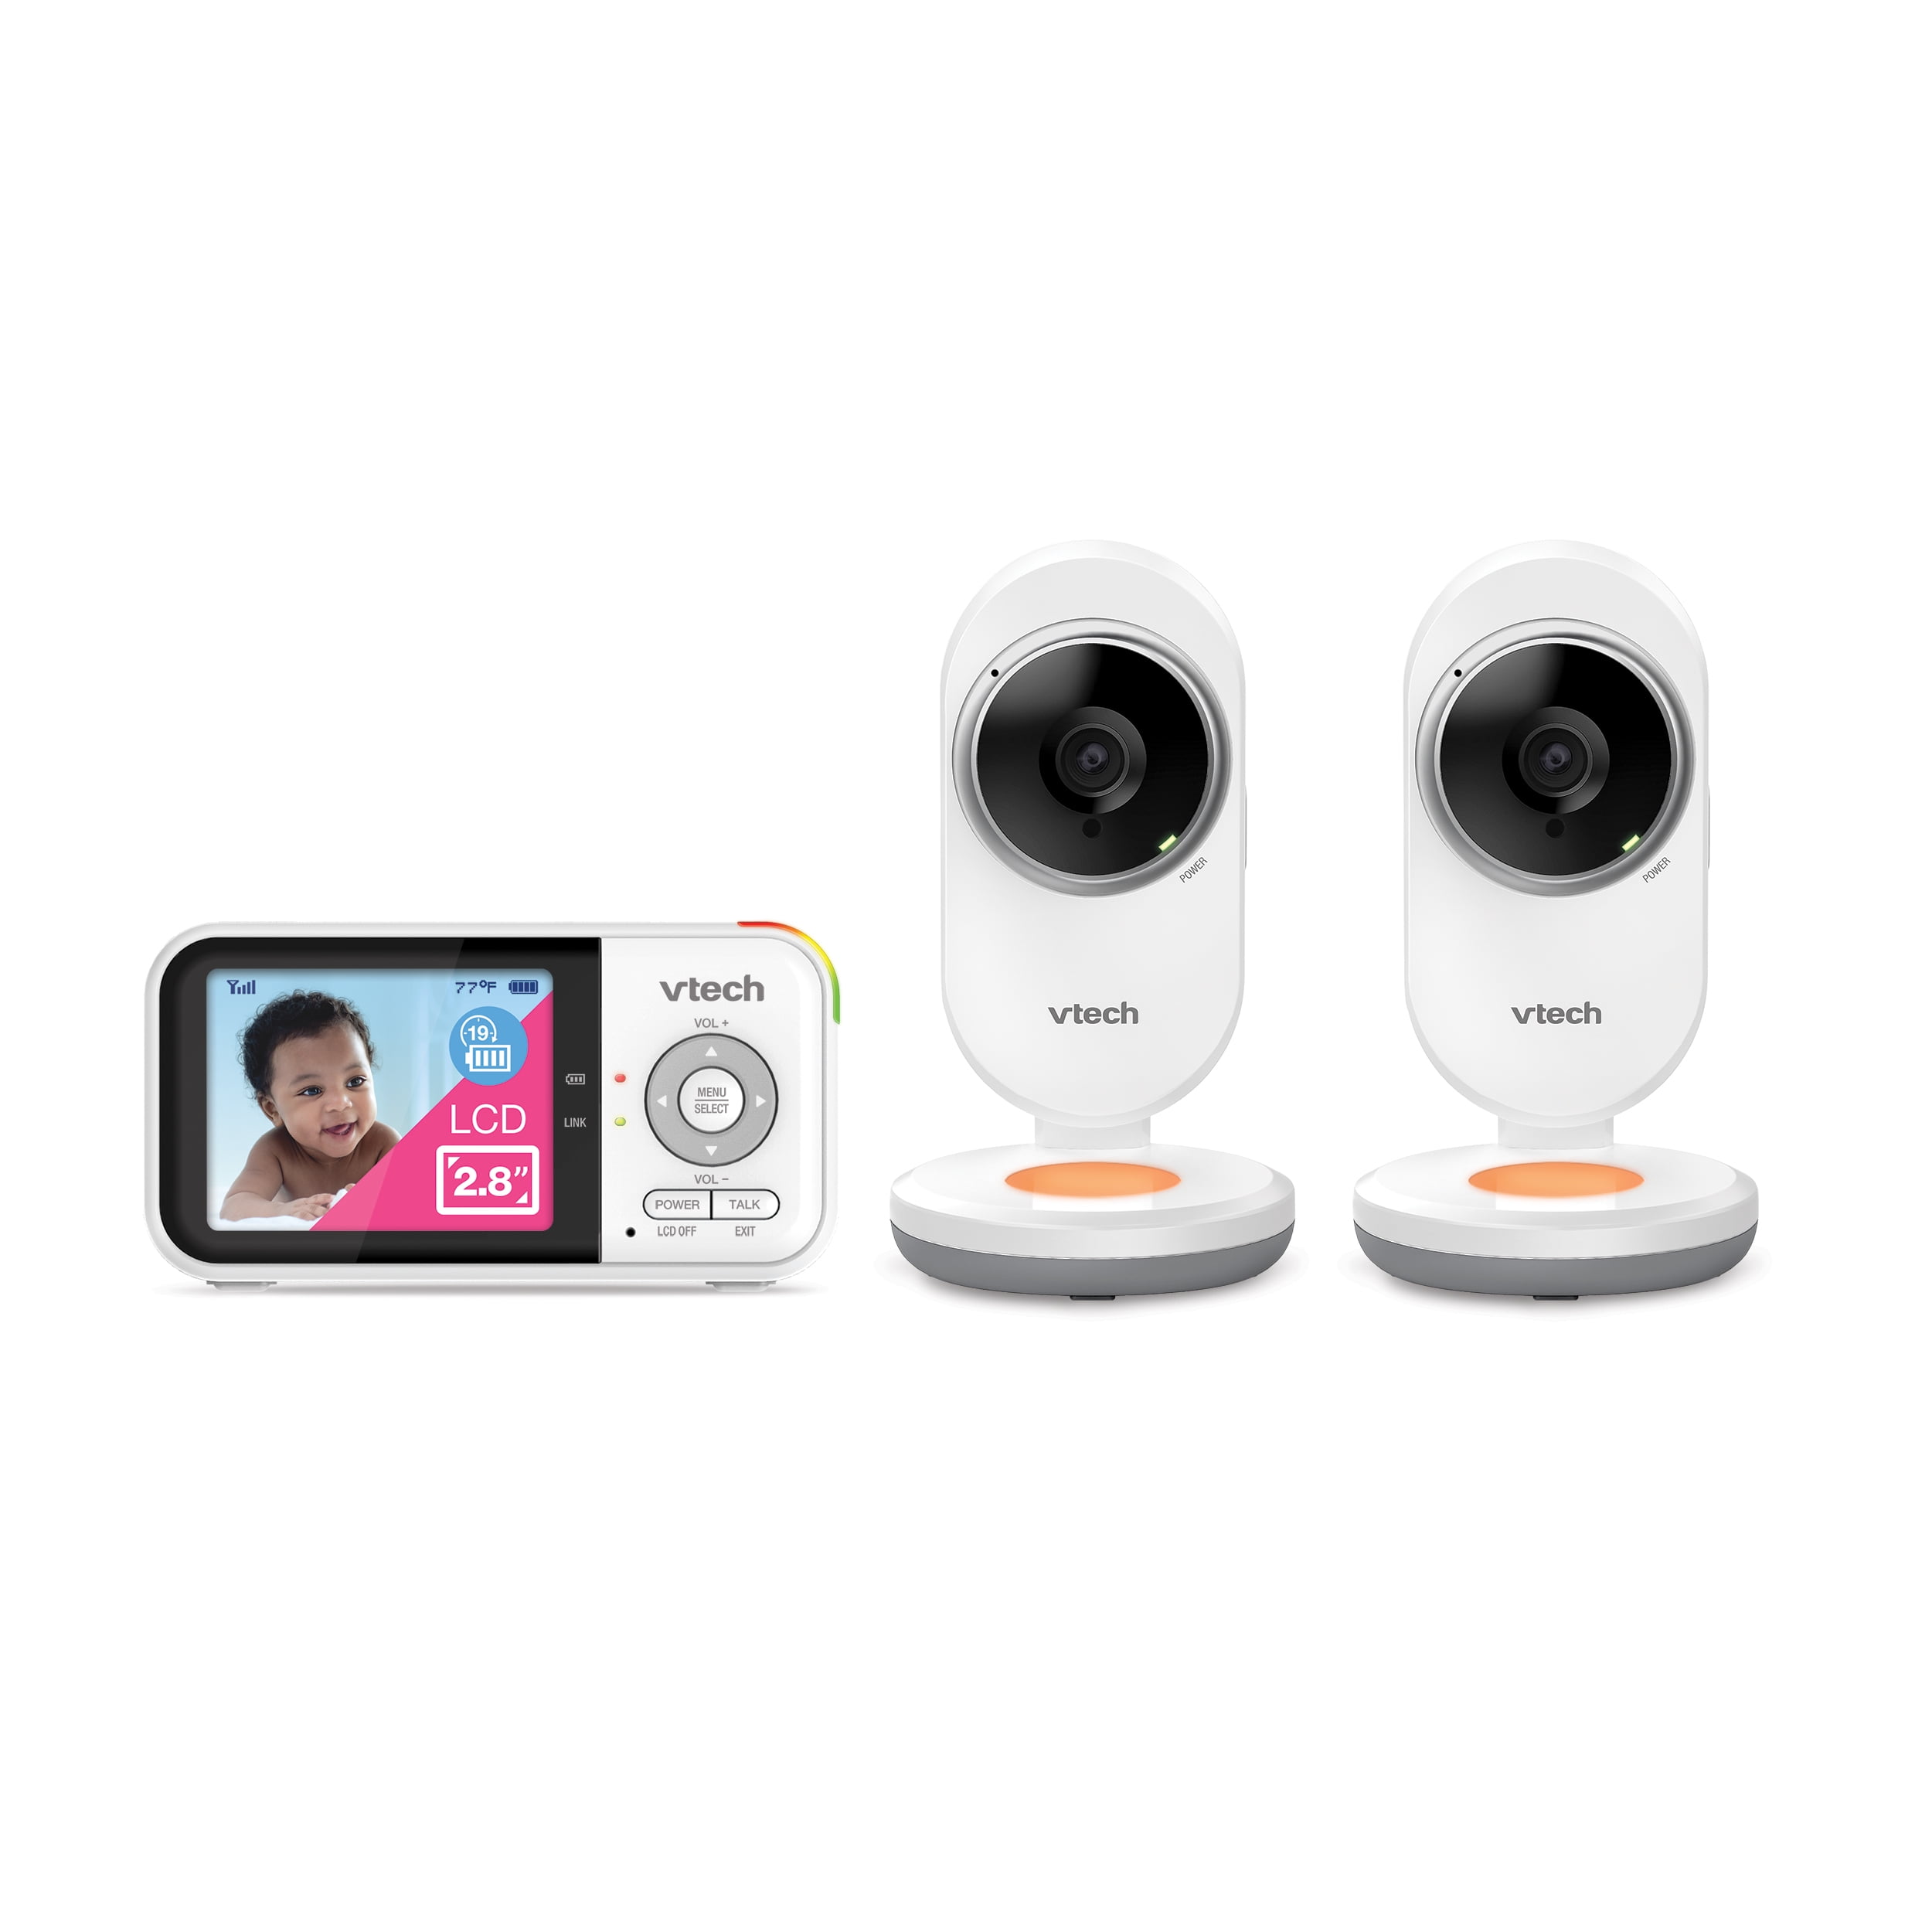 VTech VM819 Video Baby Monitor with 19 Hour Battery Life, 1000ft Long  Range, 2.8” Display, Auto Night Vision, 2Way Audio Talk, Temperature Sensor  and